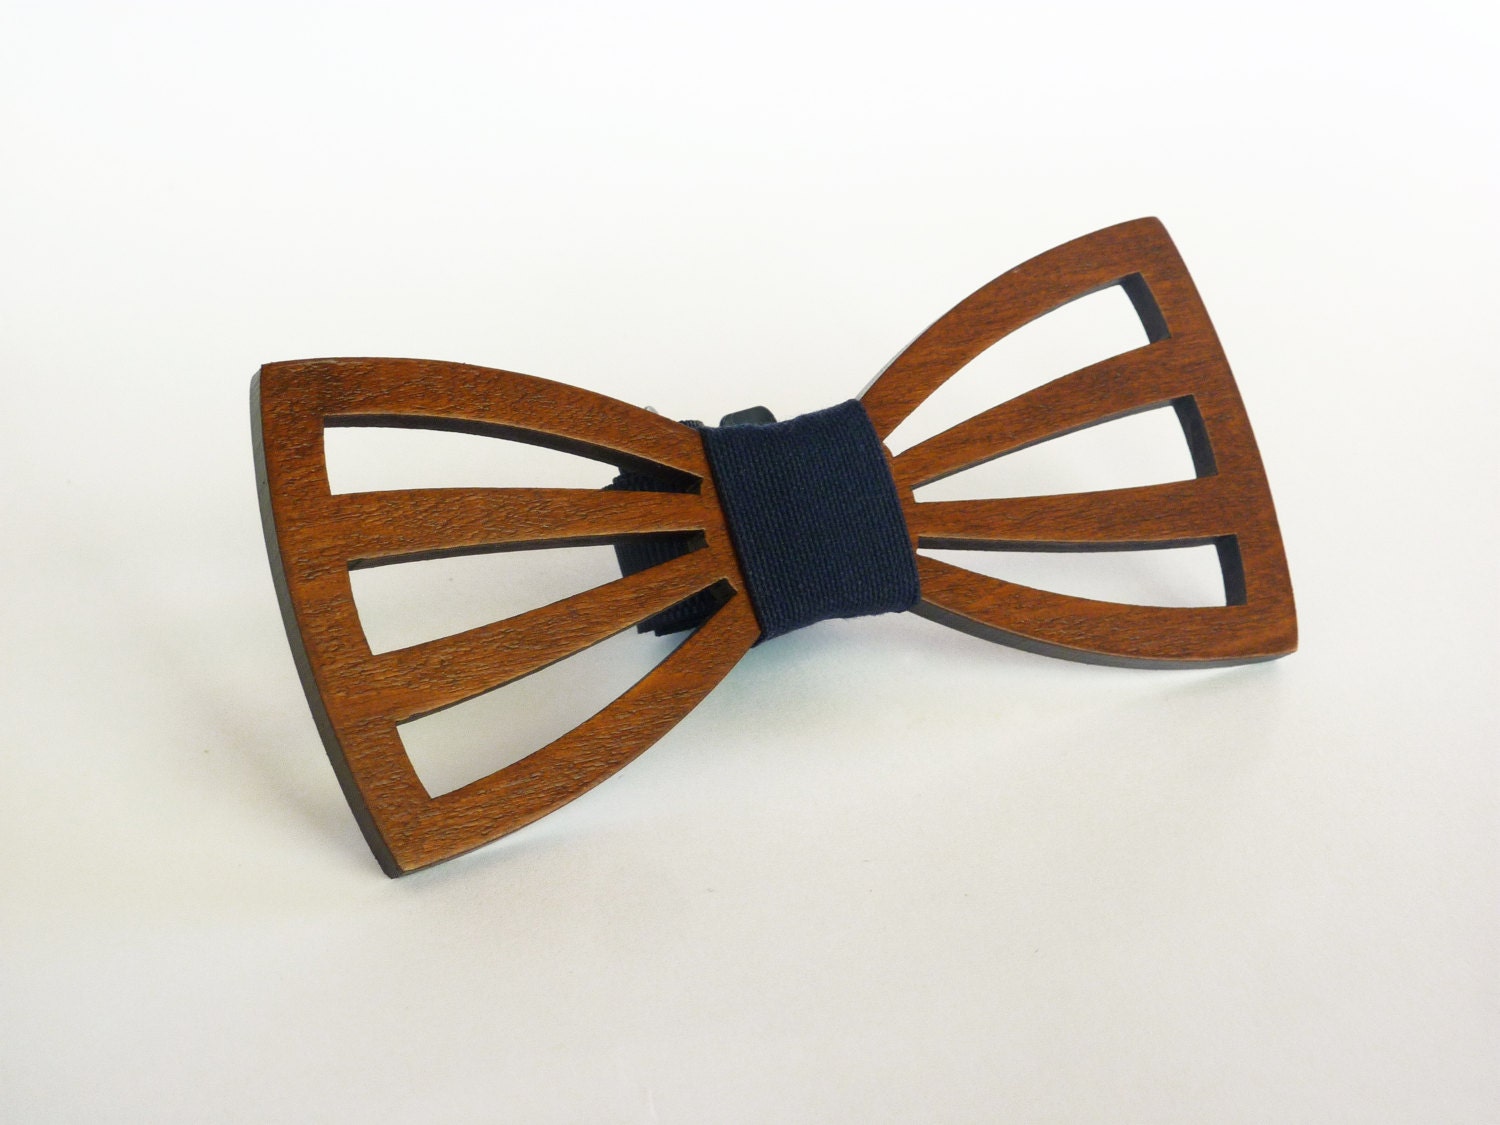 Bow tie wooden handmade natural wood Brown color use for